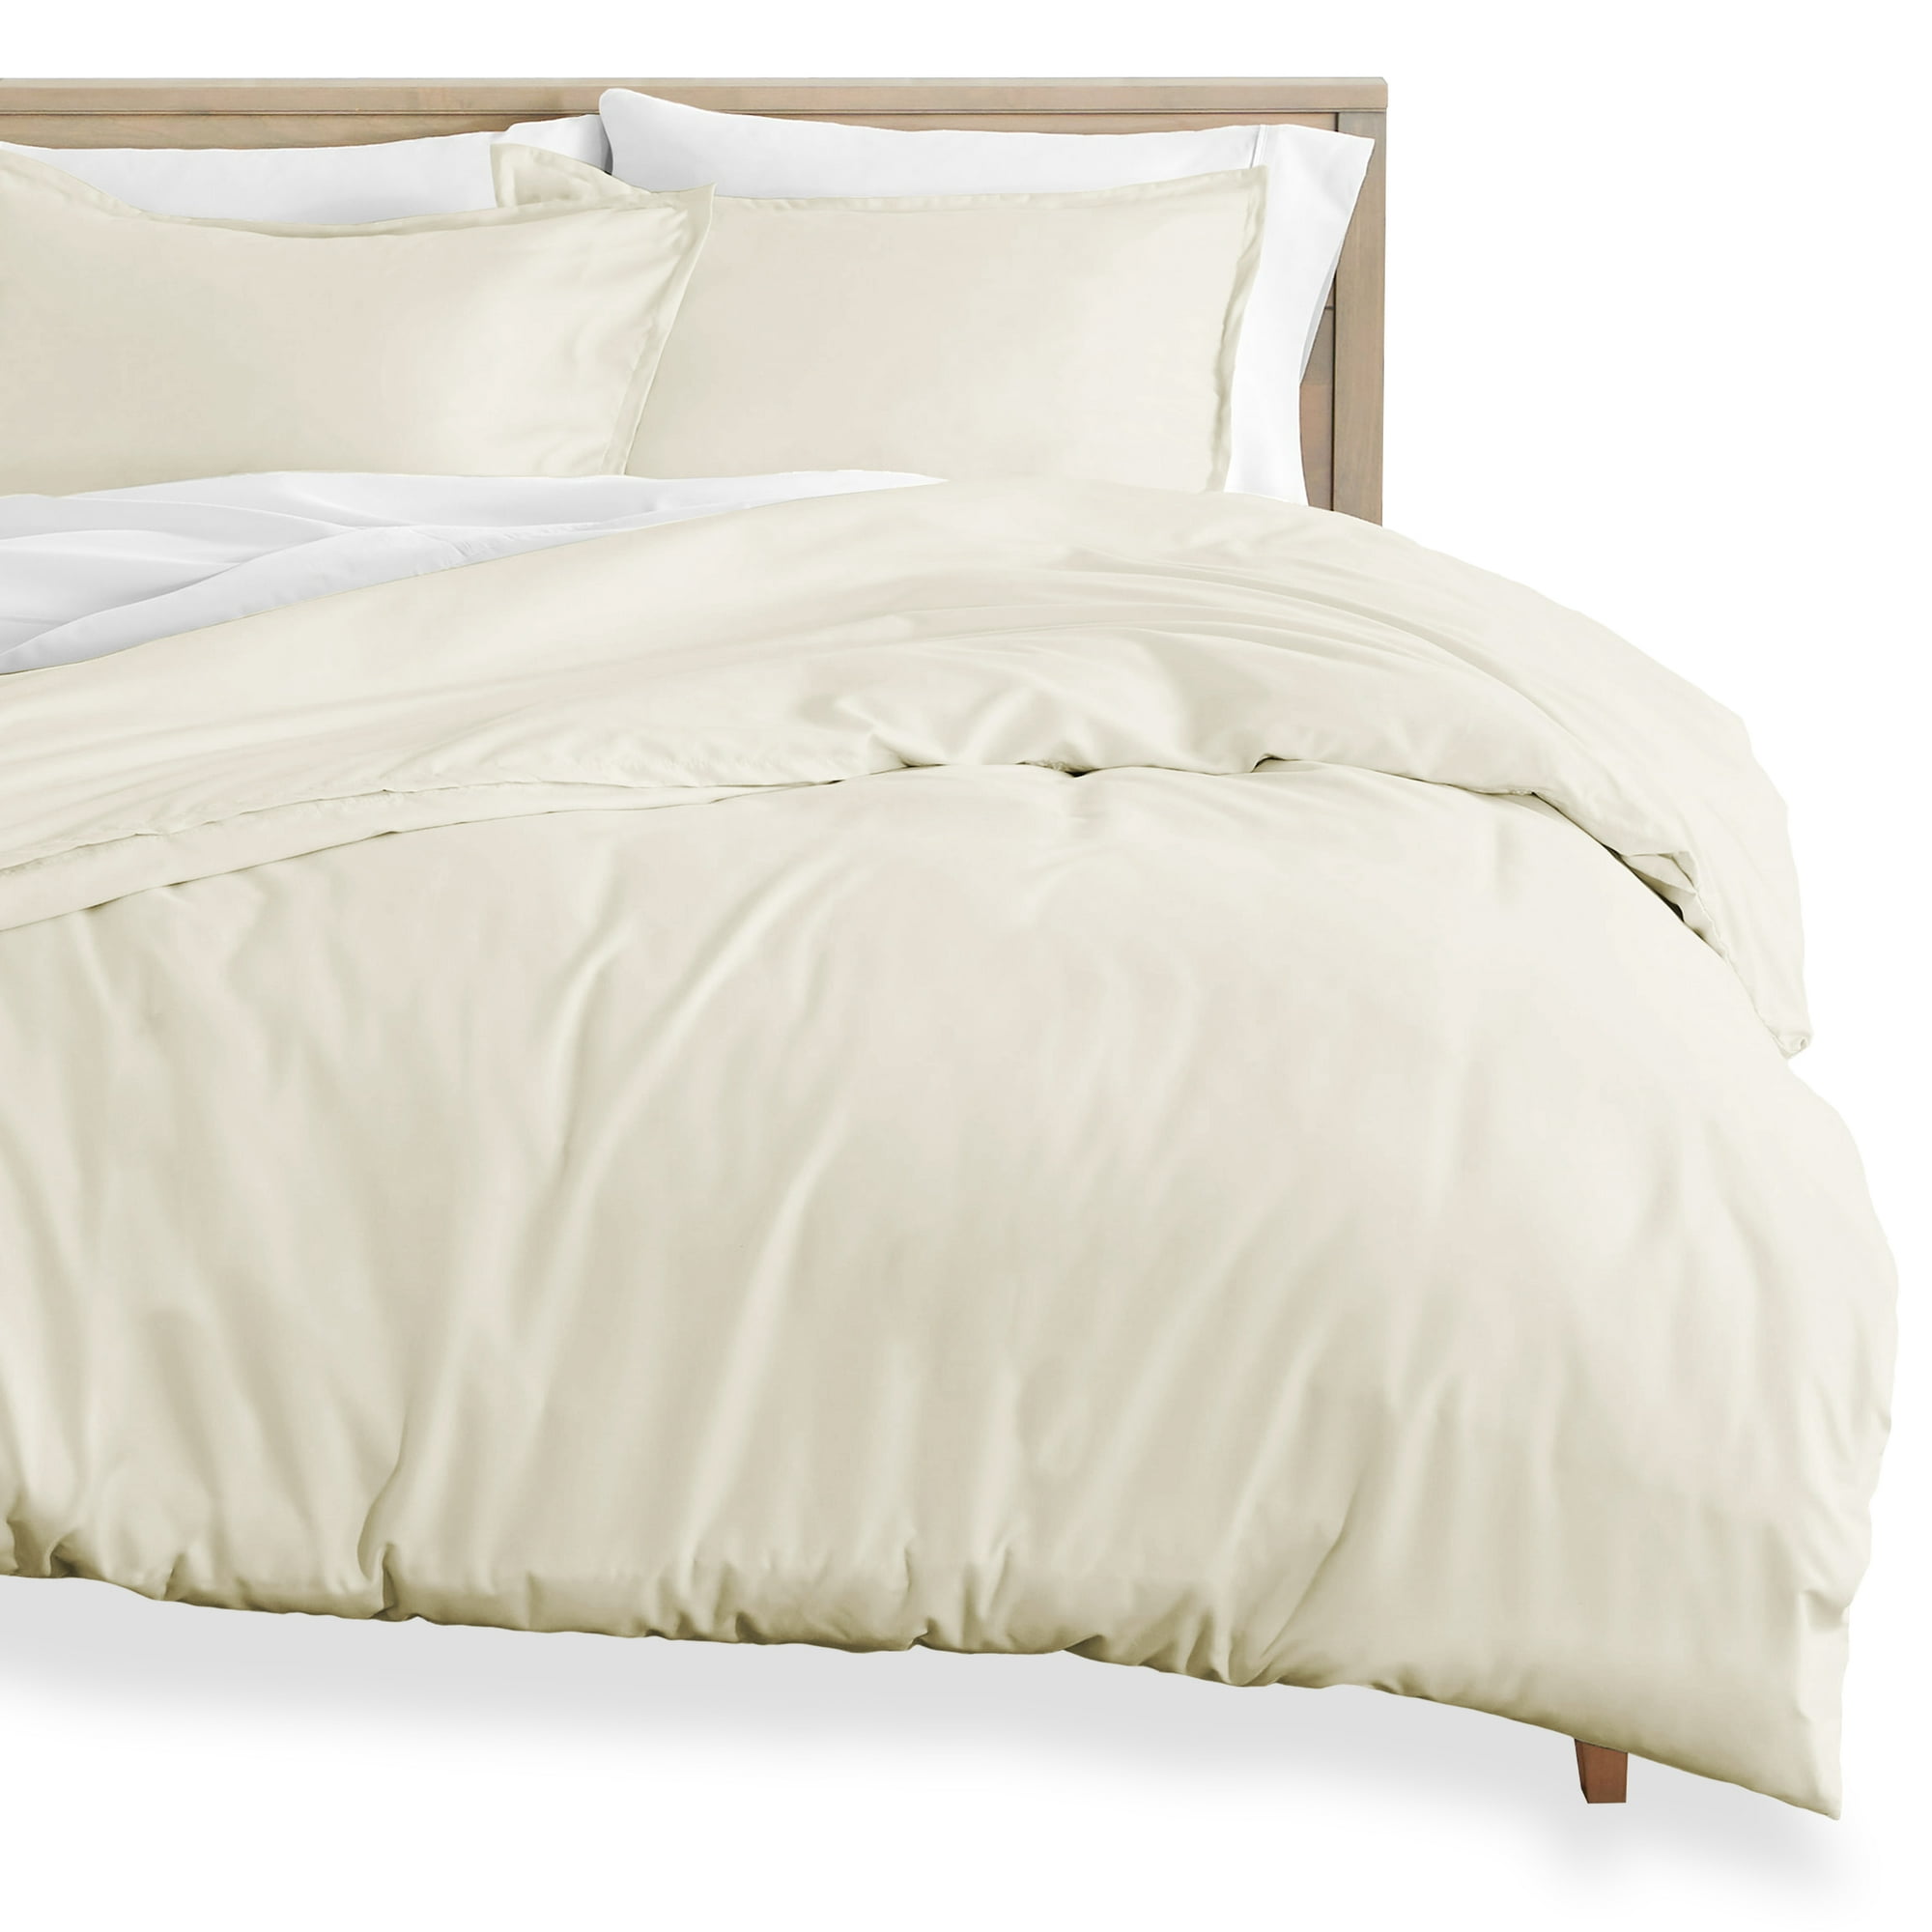 Bare Home Flannel Duvet Cover And Sham, Queen Size Flannel Duvet Cover Canada